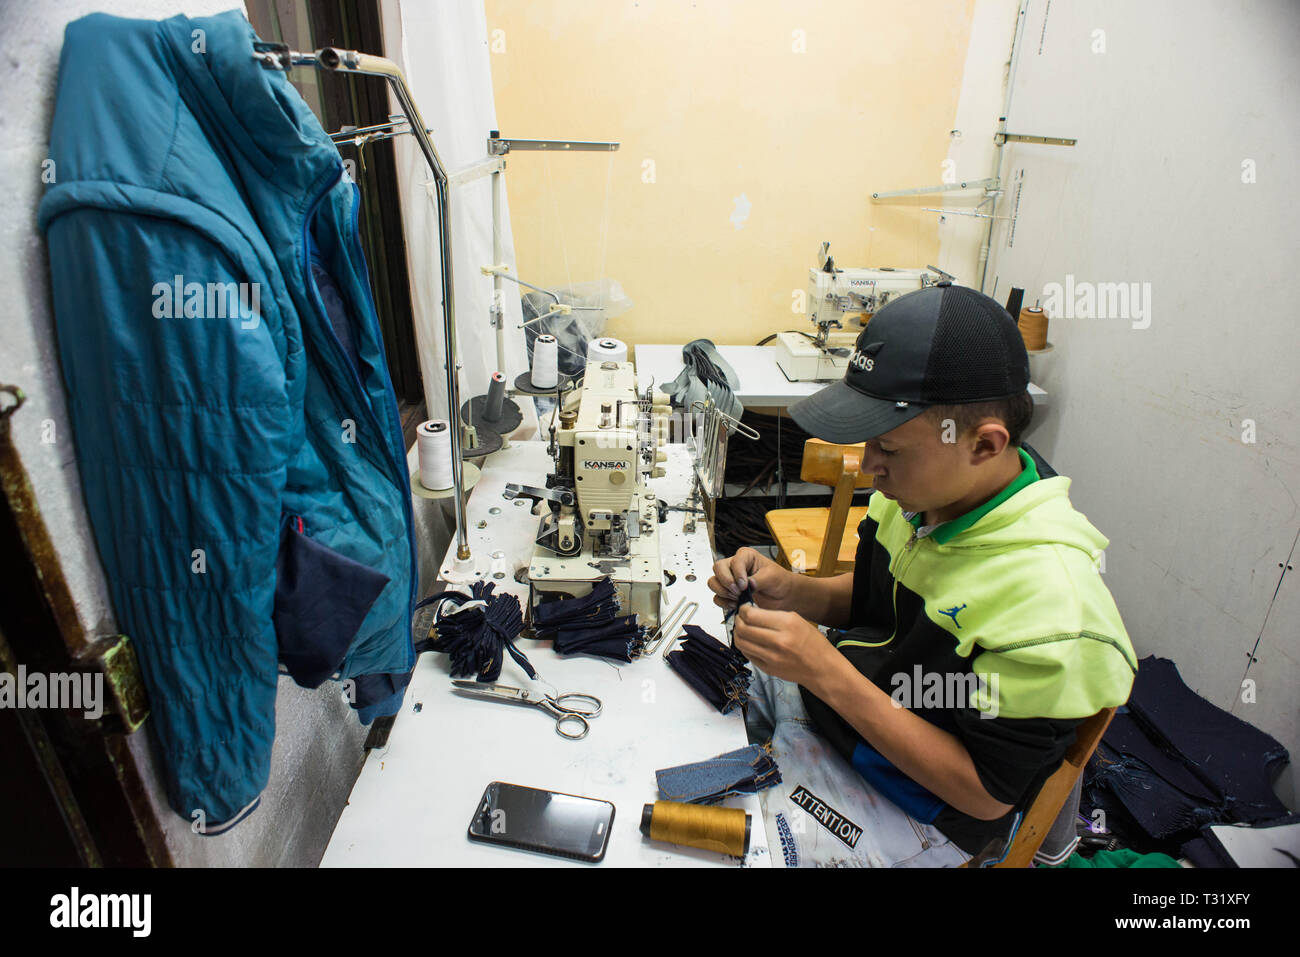 Donmatias, Antioquia, Colombia: Familiar jeans manufacturing in calle 46. Stock Photo